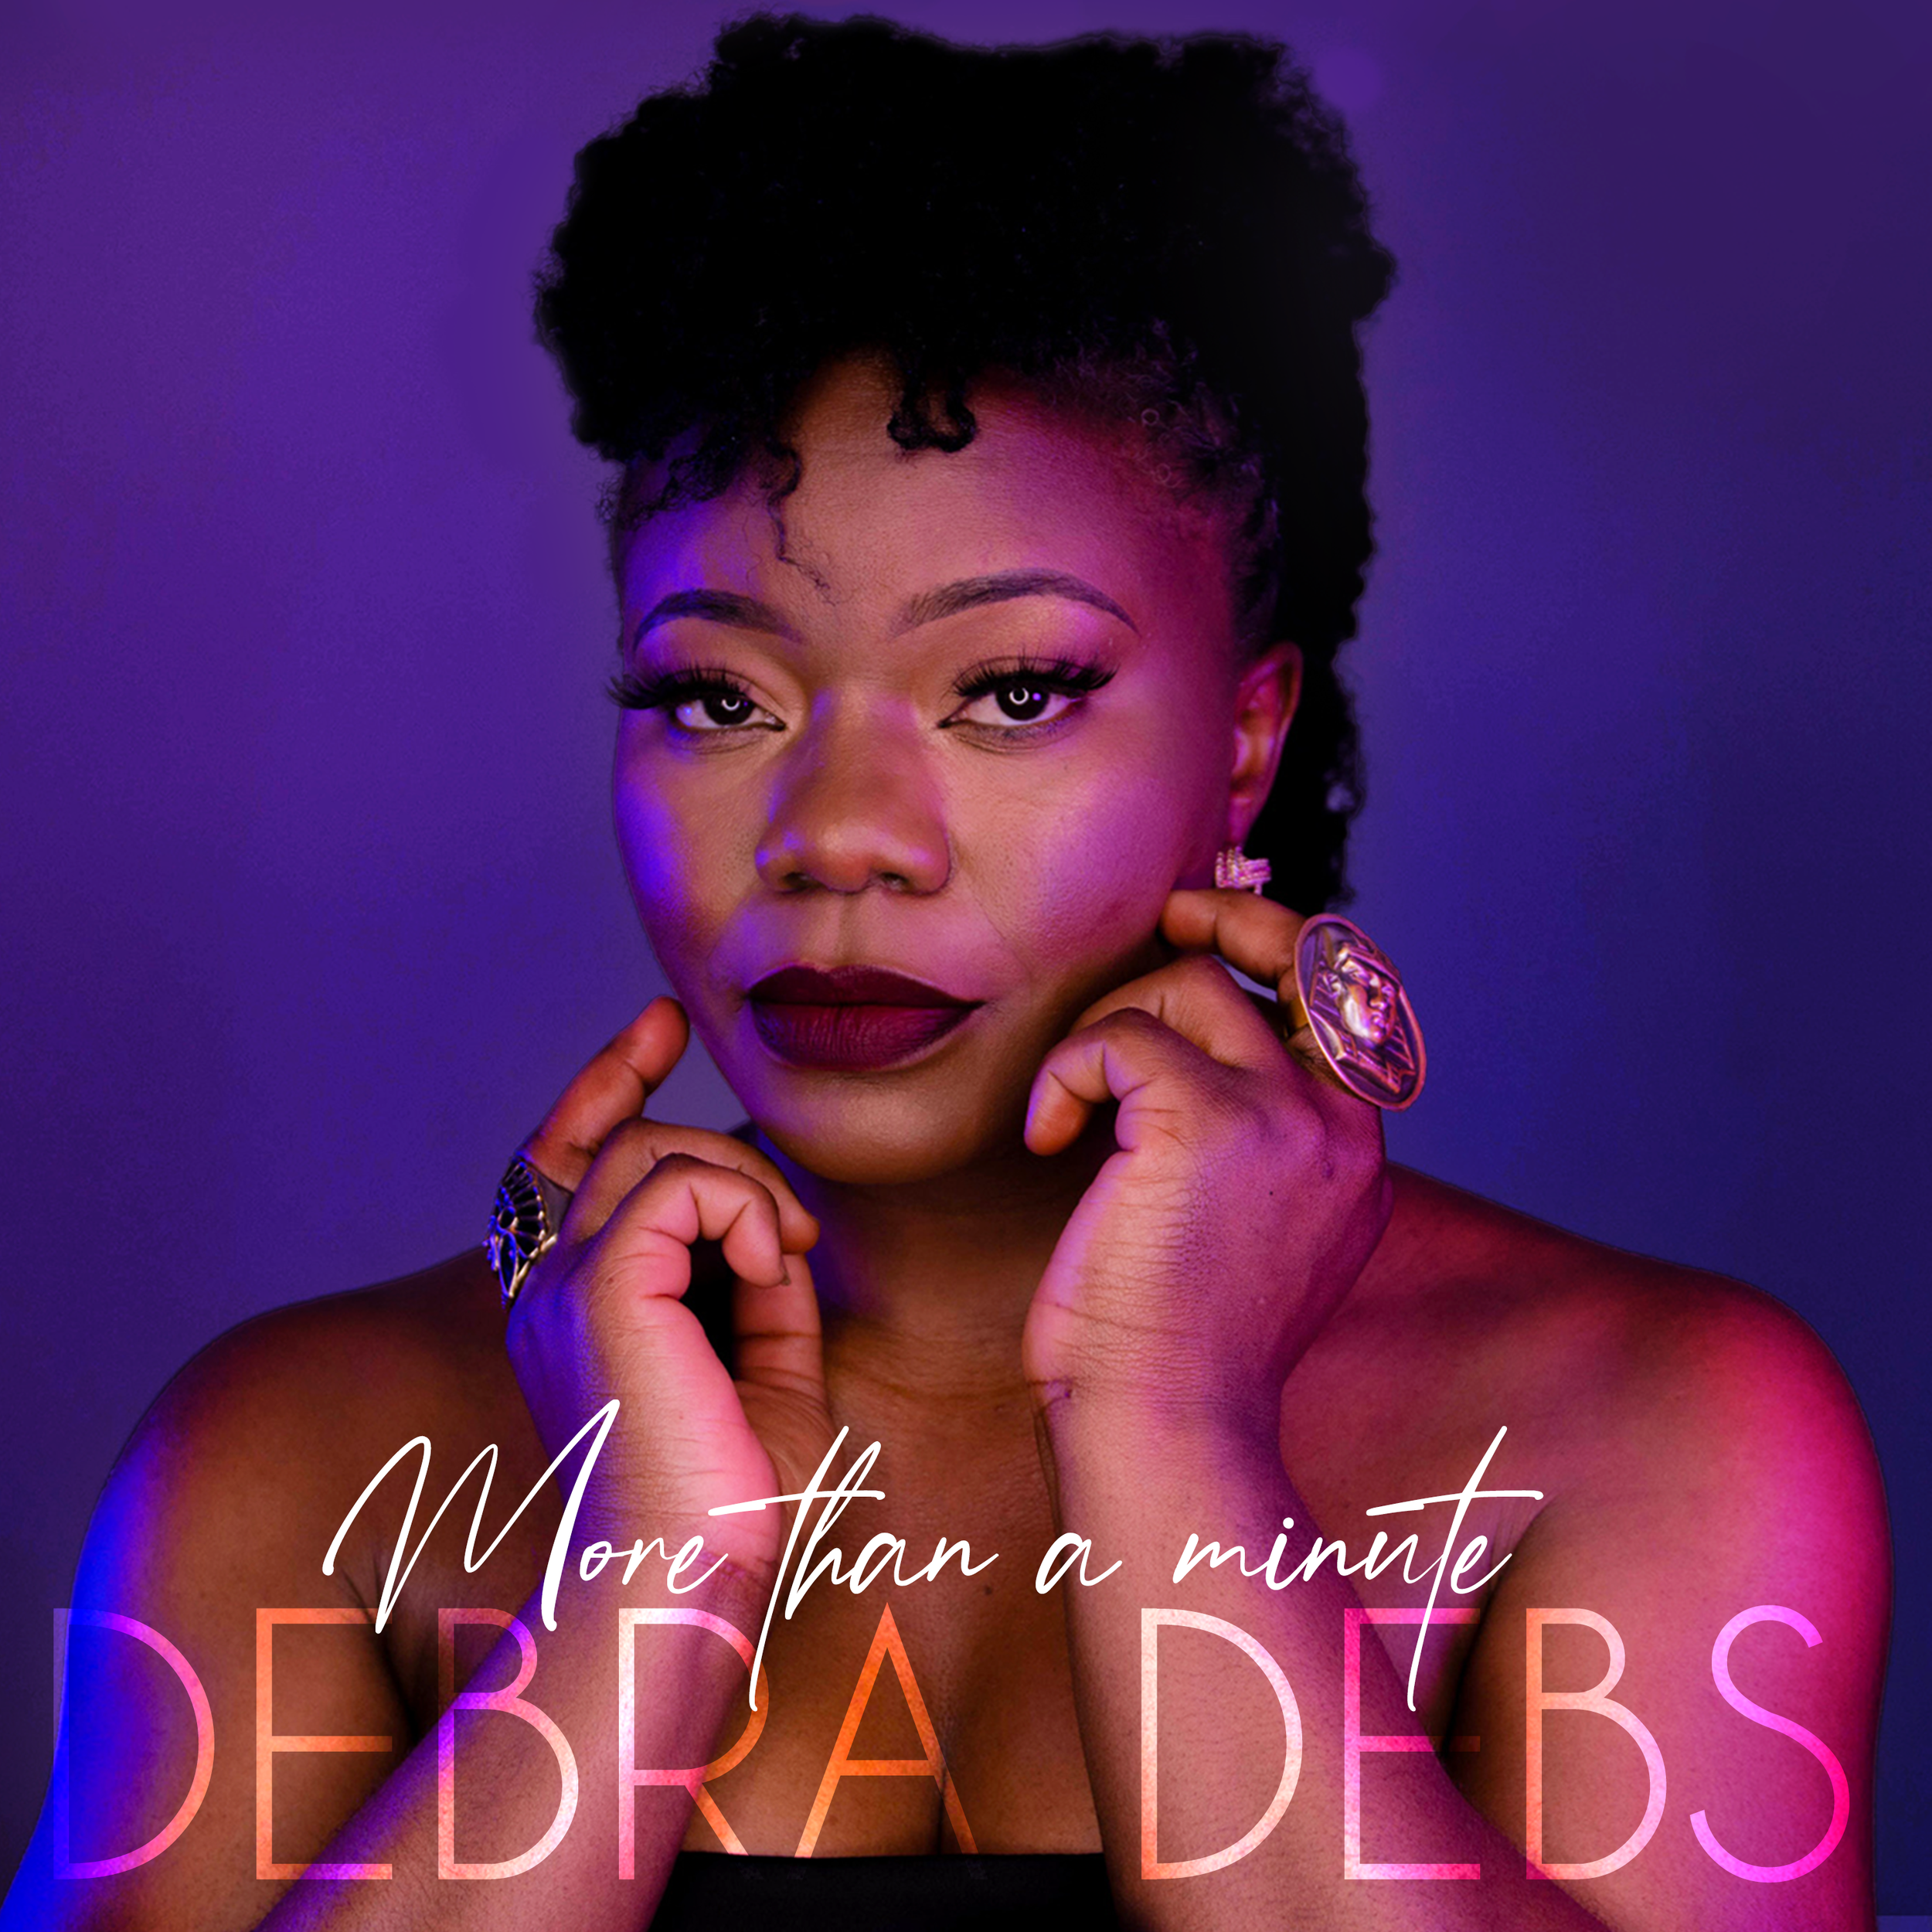 Debra-Debs---More-than-a-minute1---Official-Cover.png